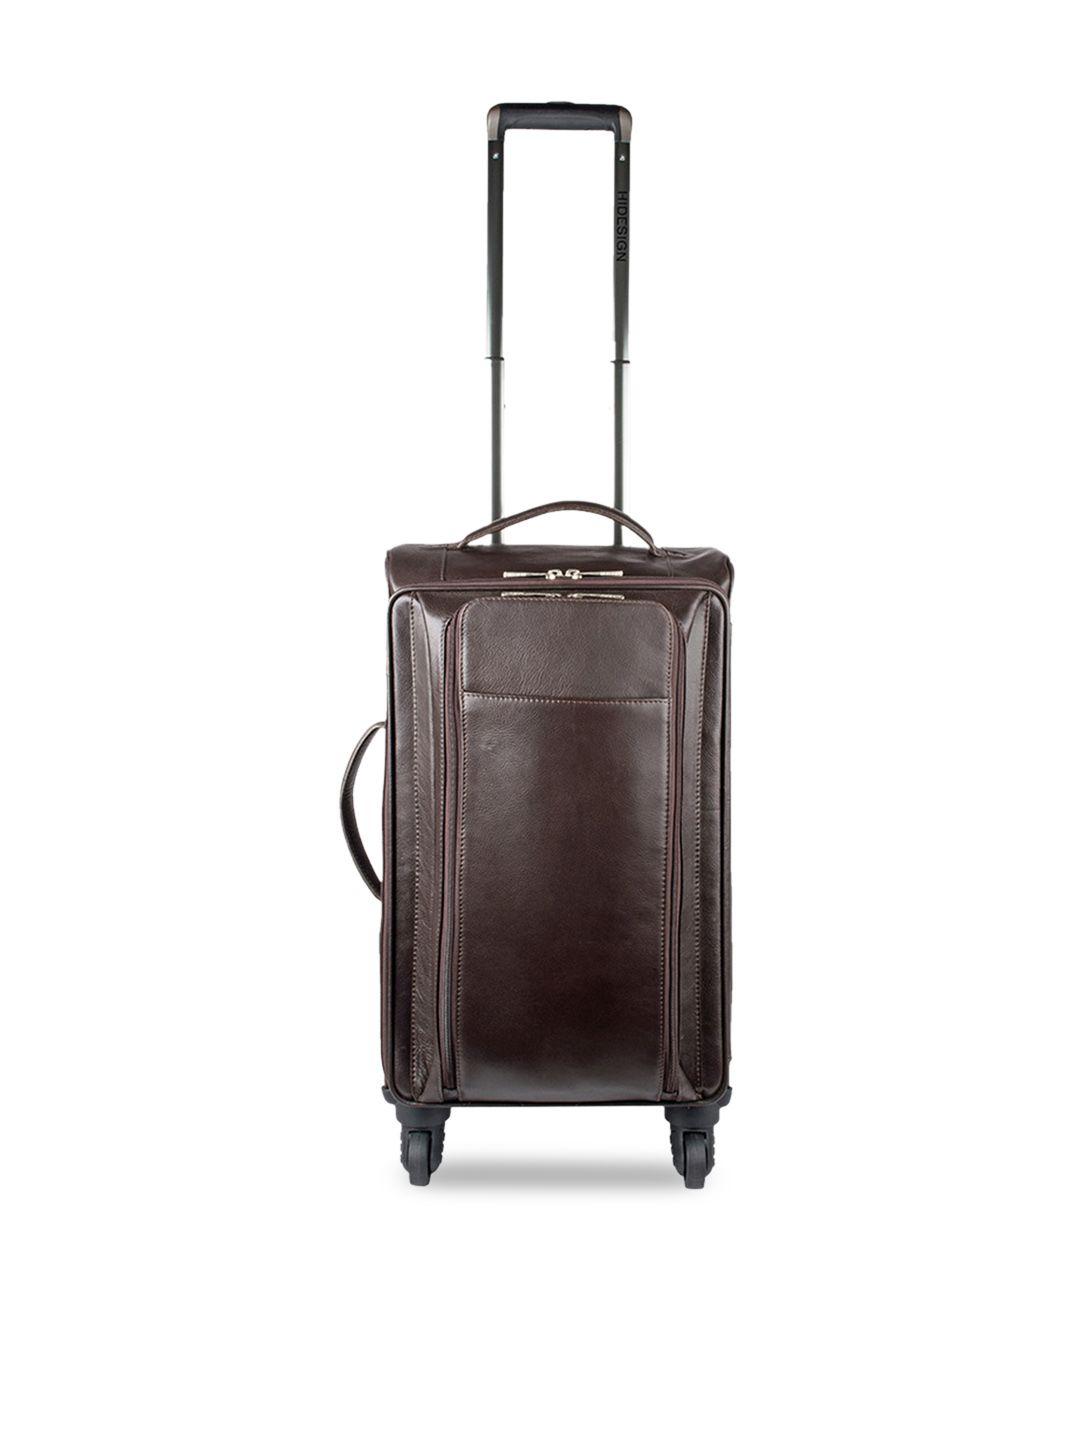 hidesign-unisex-brown-solid-leather-large-trolley-suitcase